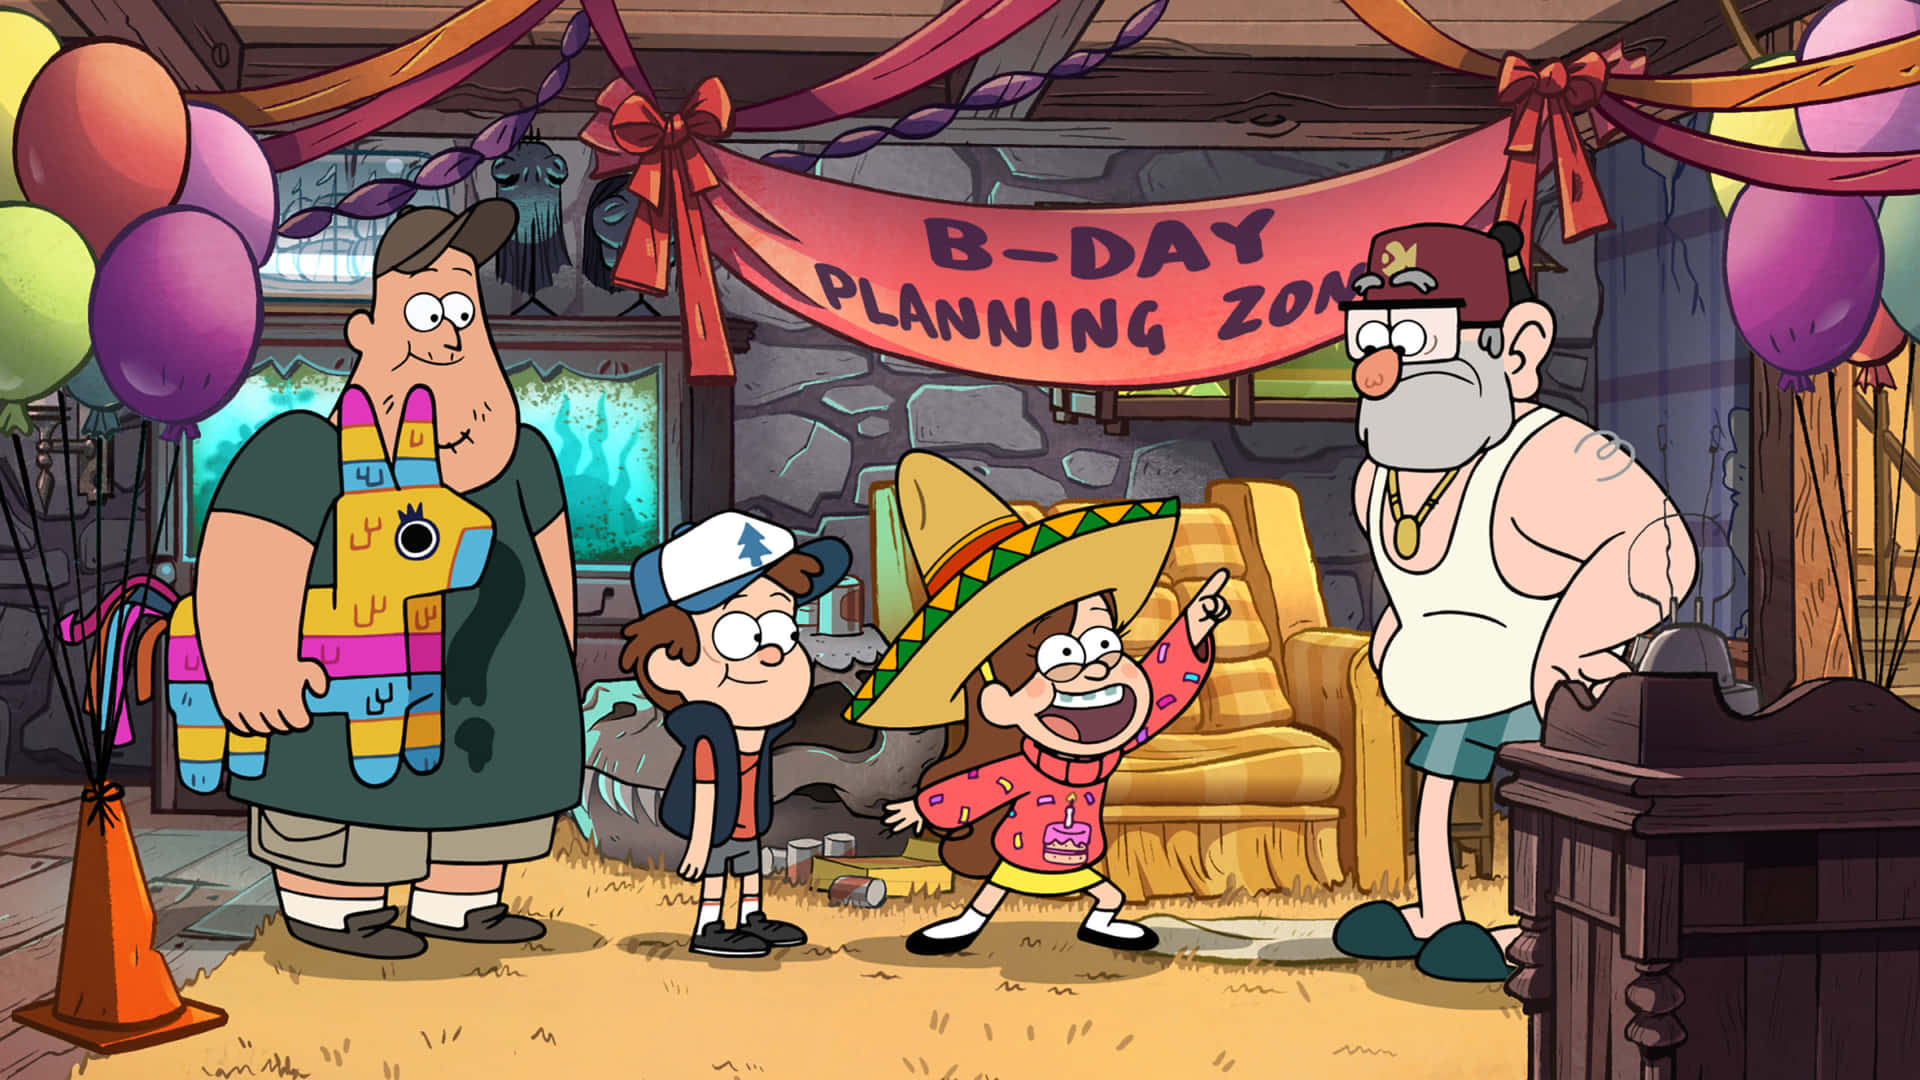 See what secrets the town of Gravity Falls, Oregon holds